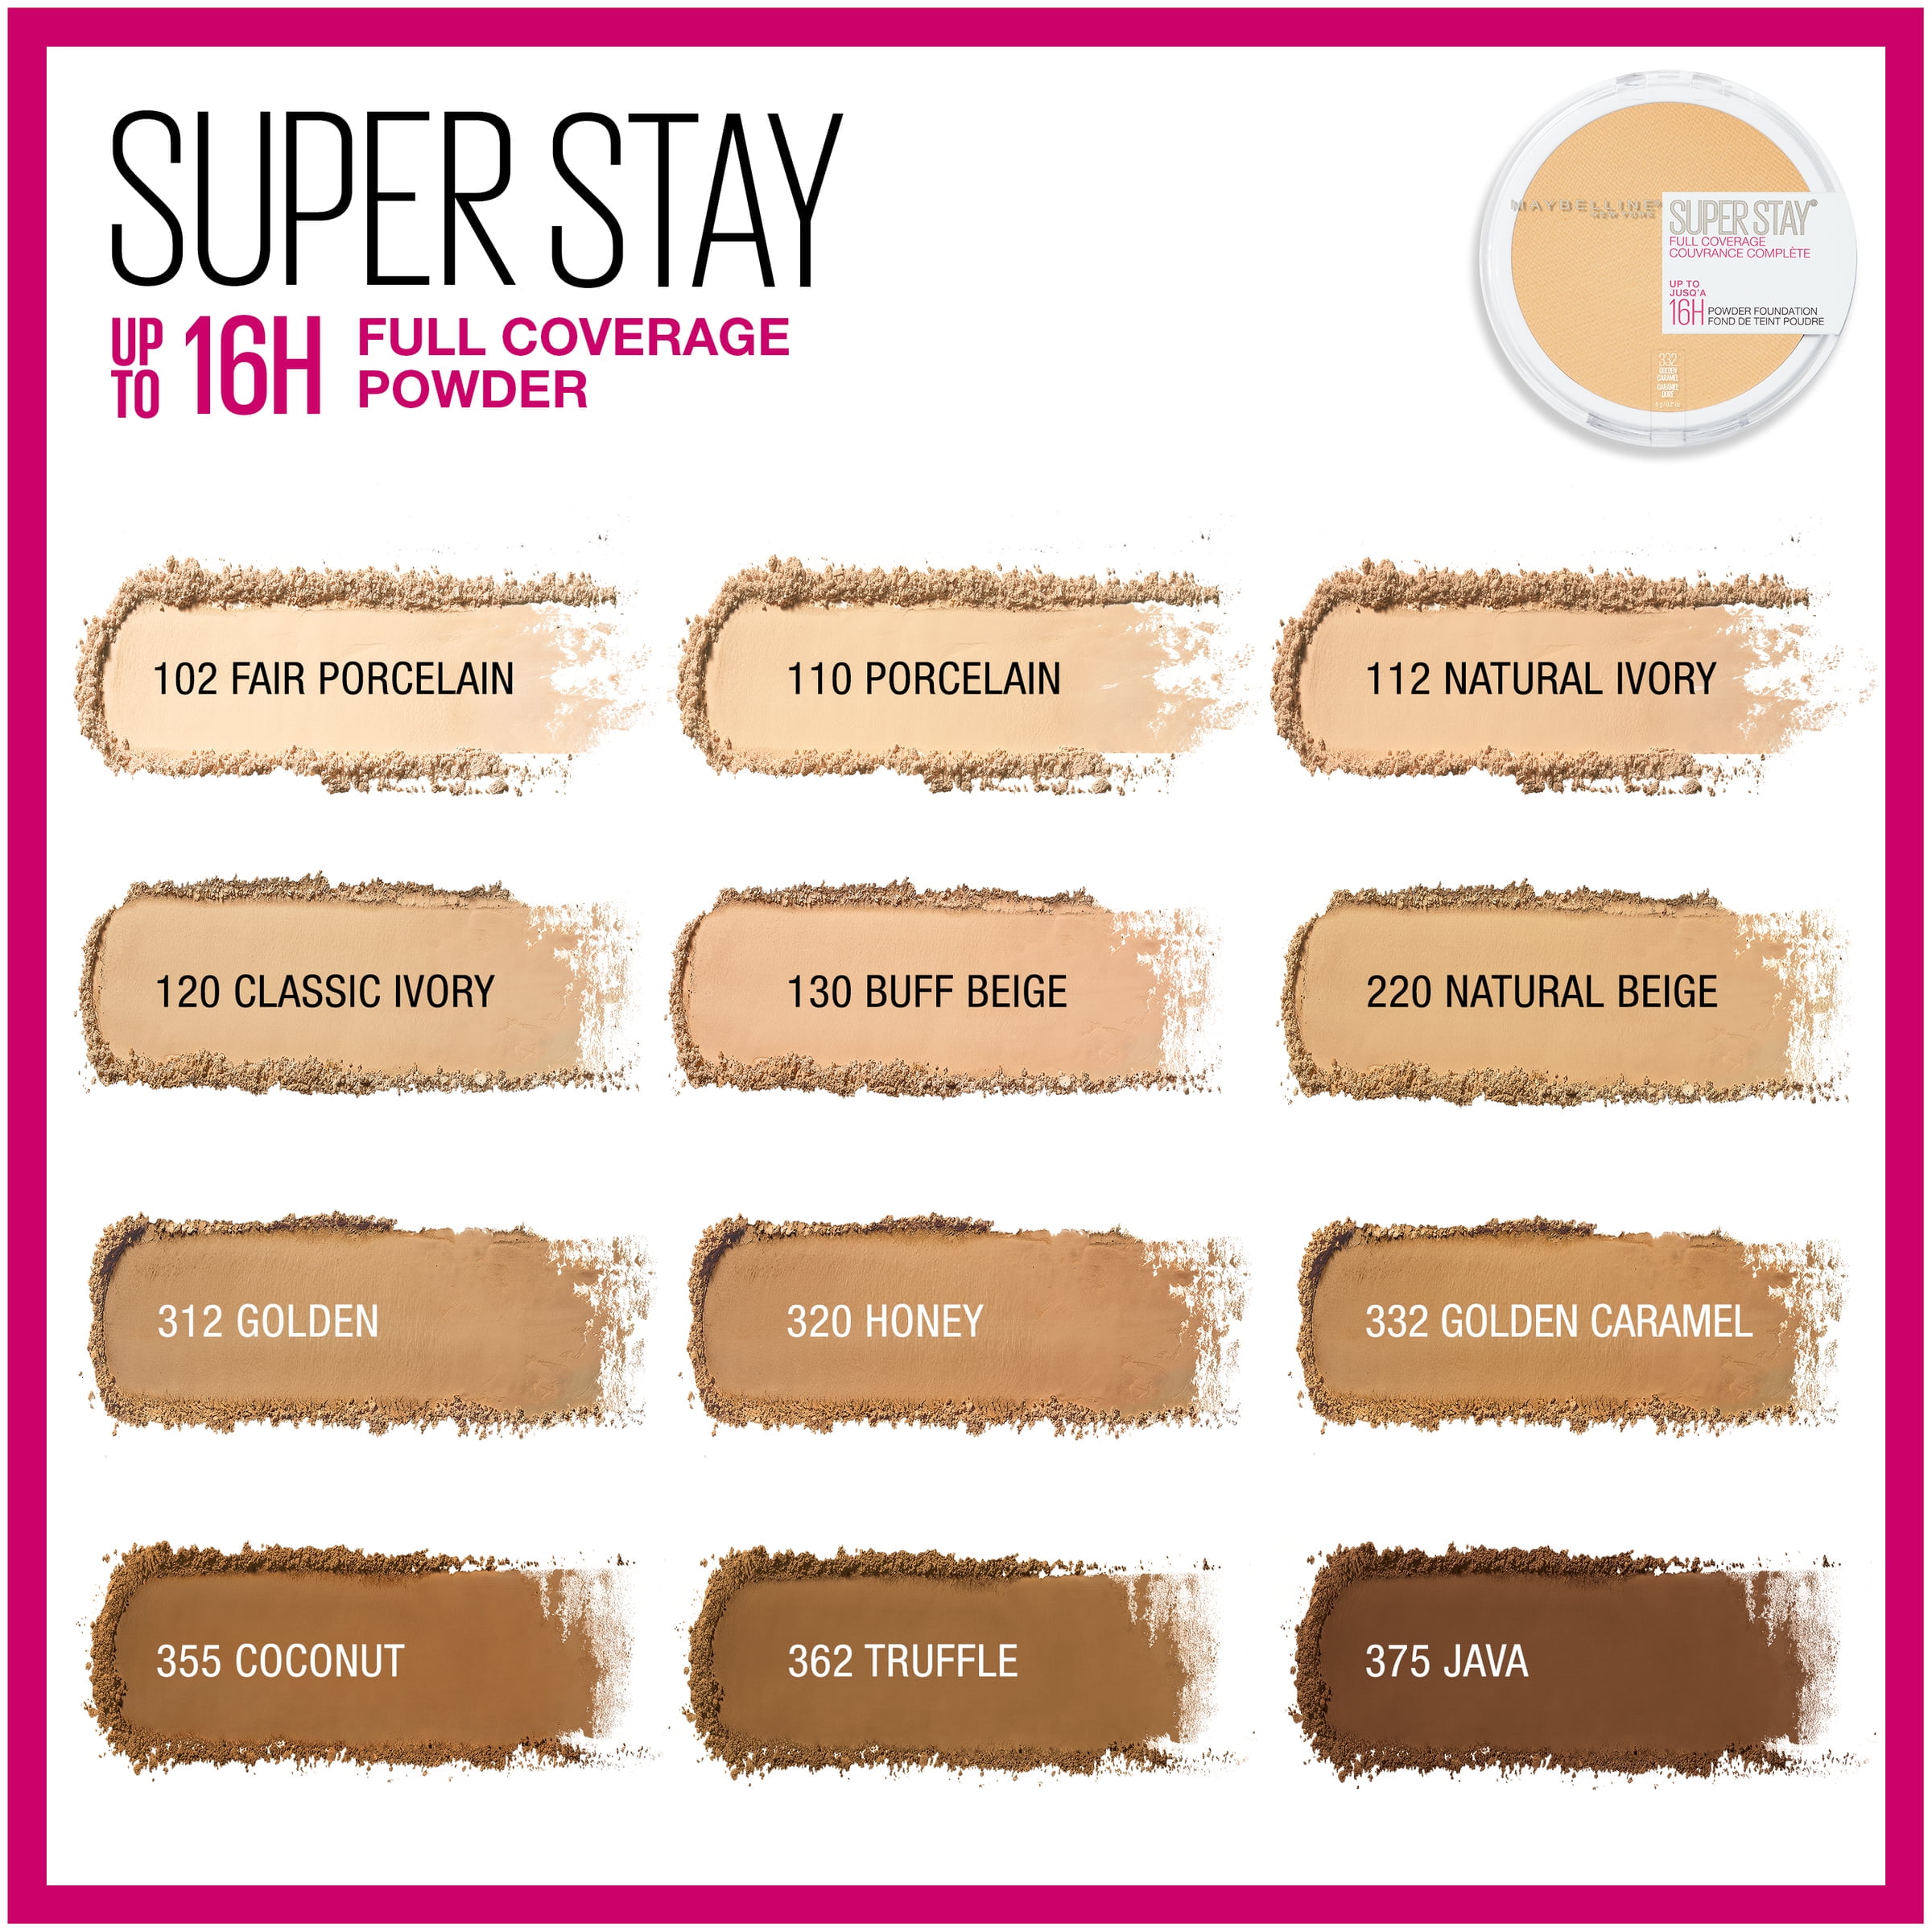 Maybelline Super Stay Powder Foundation Makeup, Full Coverage, 112 Natural  Ivory, 0.21 oz